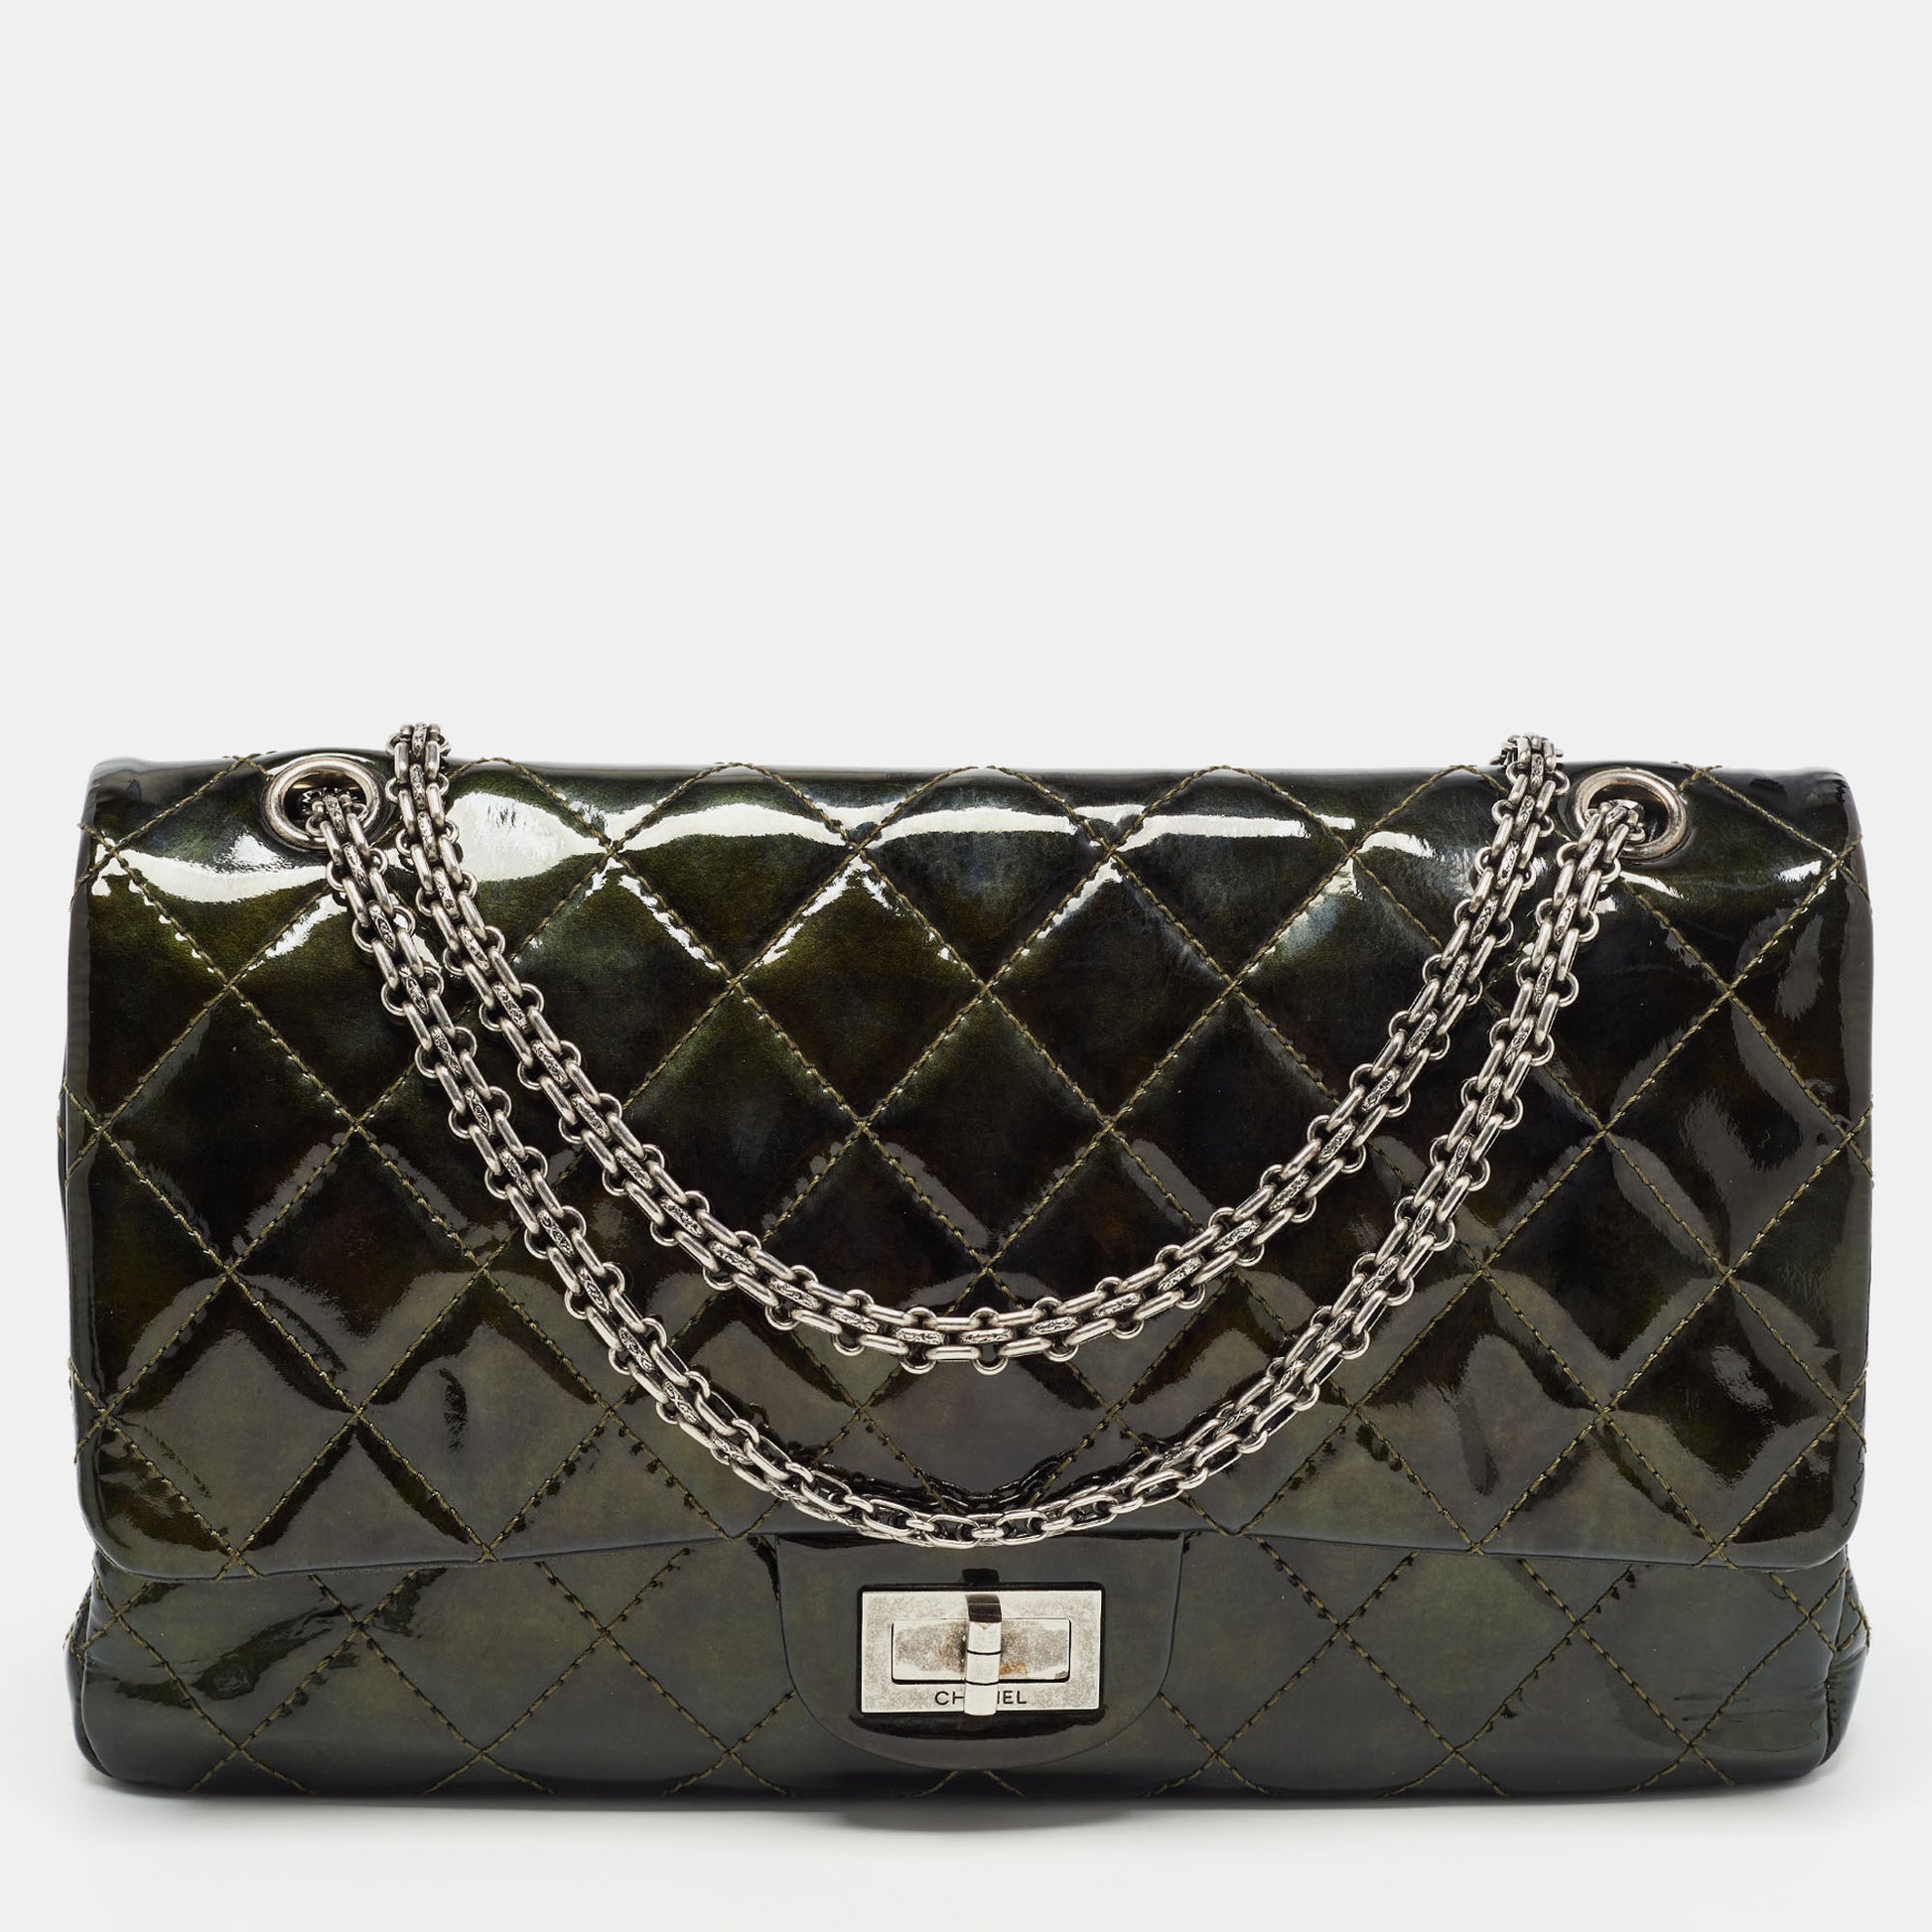 CHANEL Green Quilted Patent Leather Reissue 2.55 Classic 227 Flap Bag